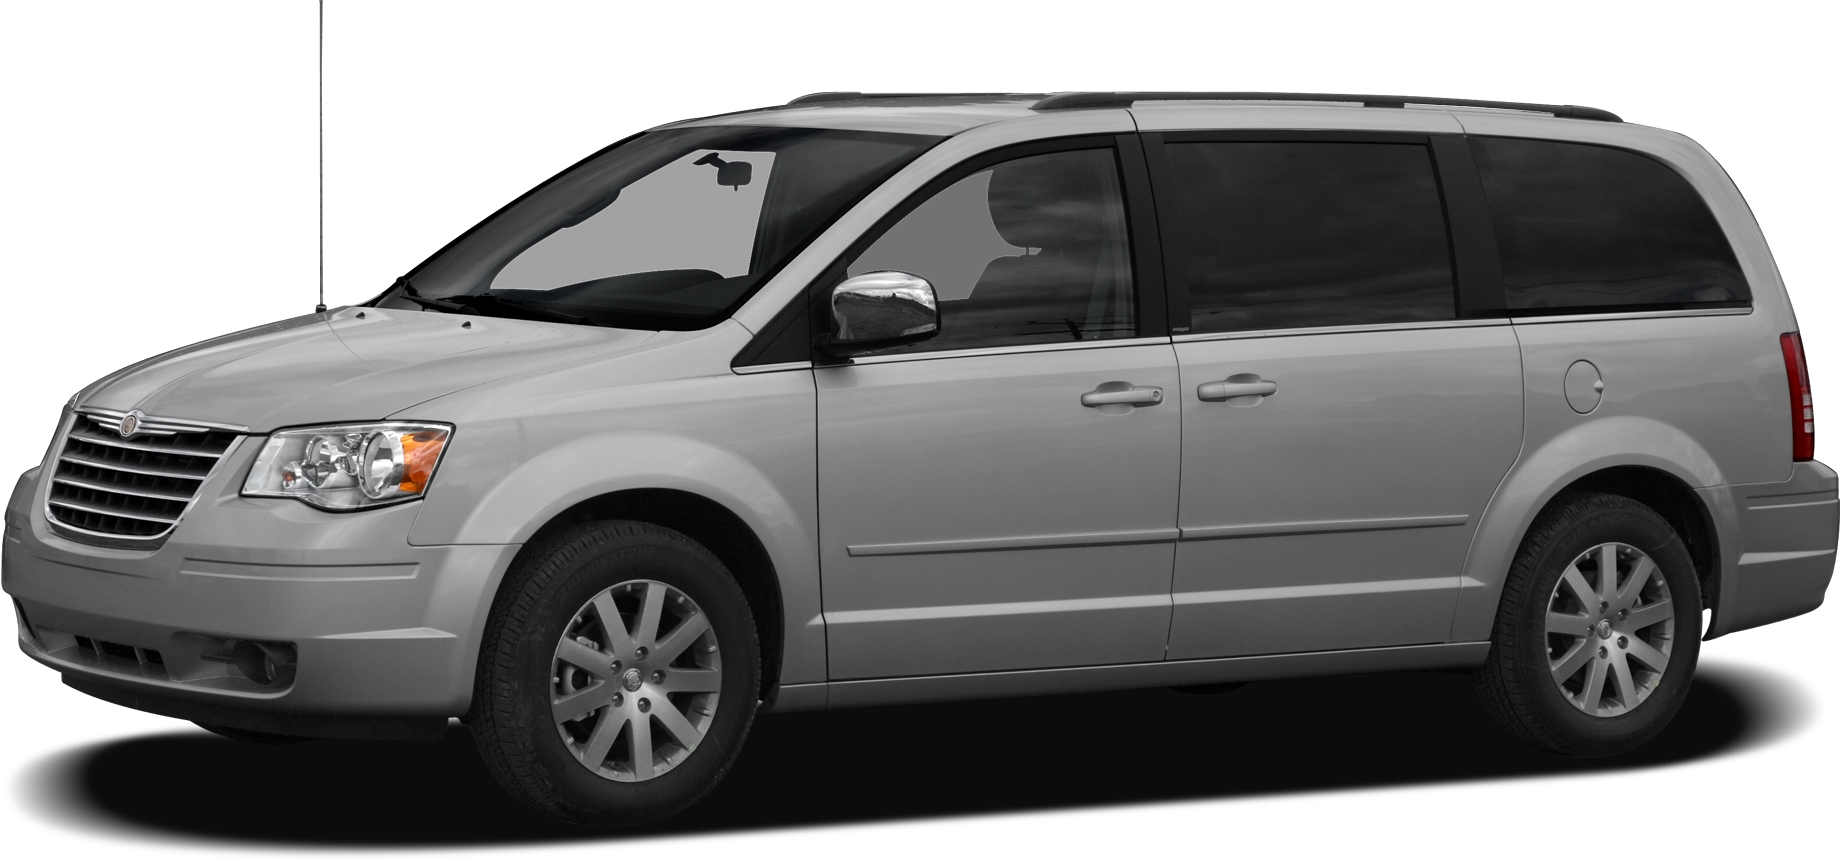 2010 Chrysler town and country service schedule #5